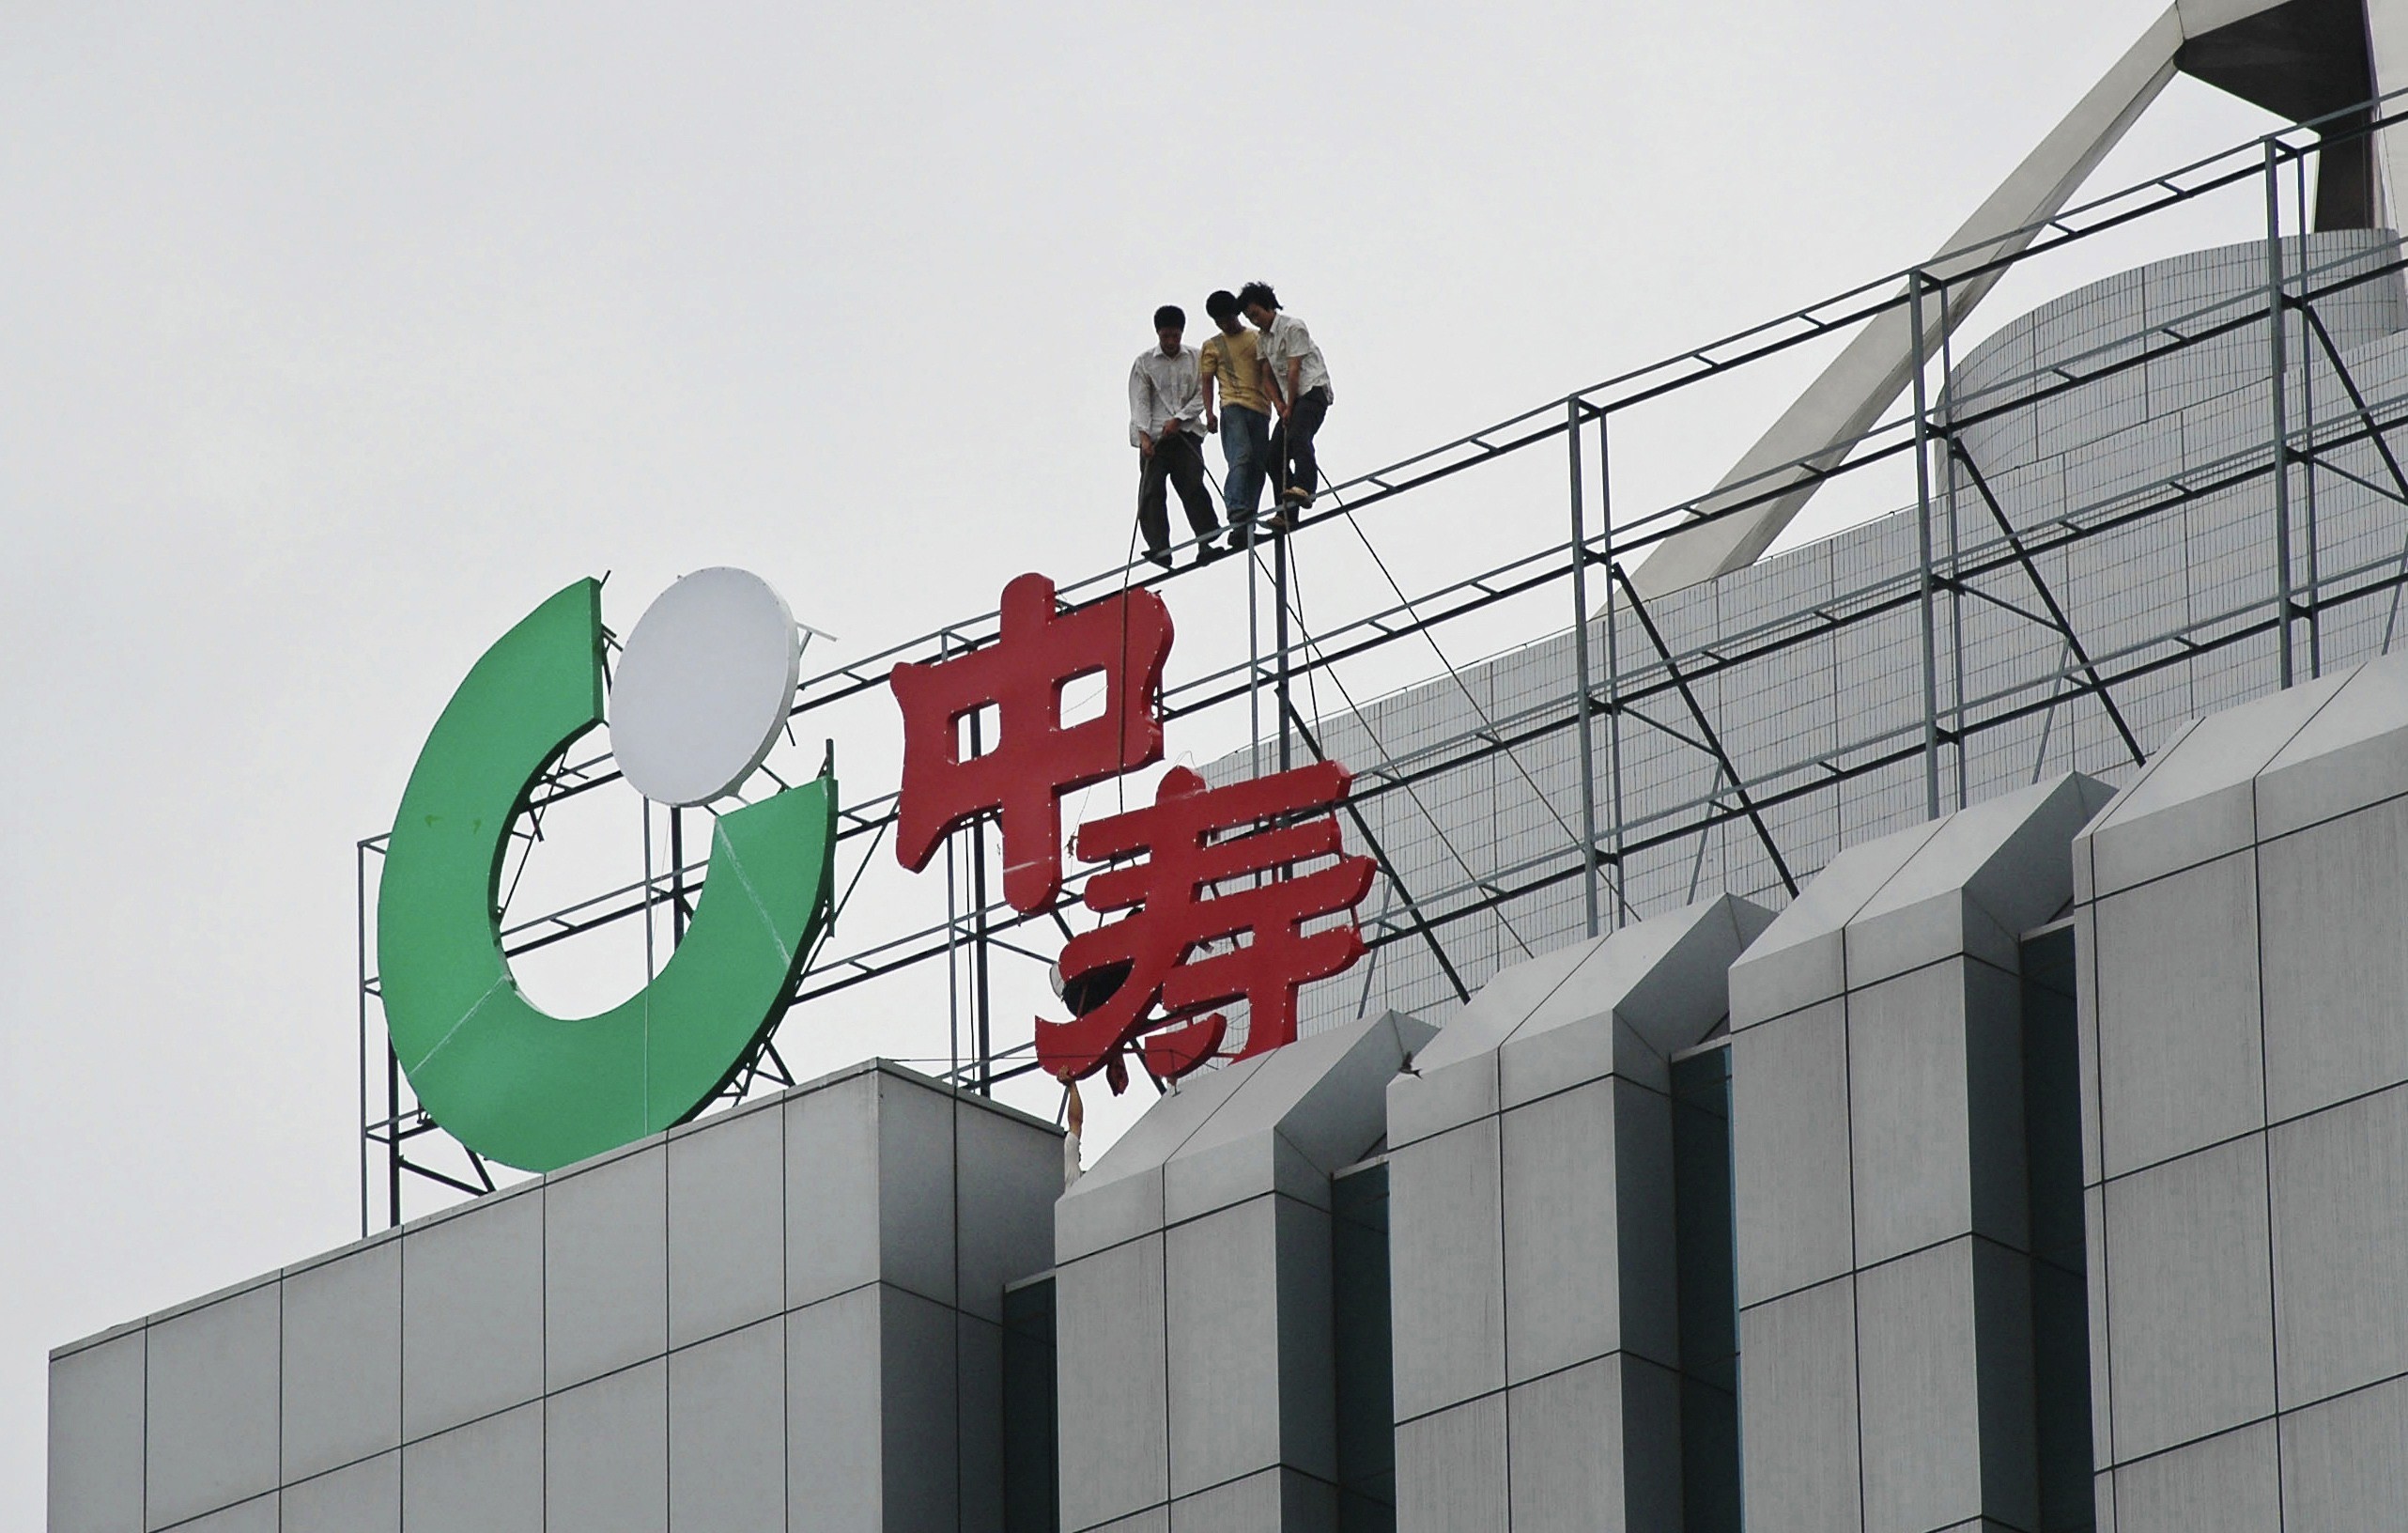 China Life reported a 68 per cent jump in year on year profit to 32.25 billion yuan in 2017. Photo: Reuters